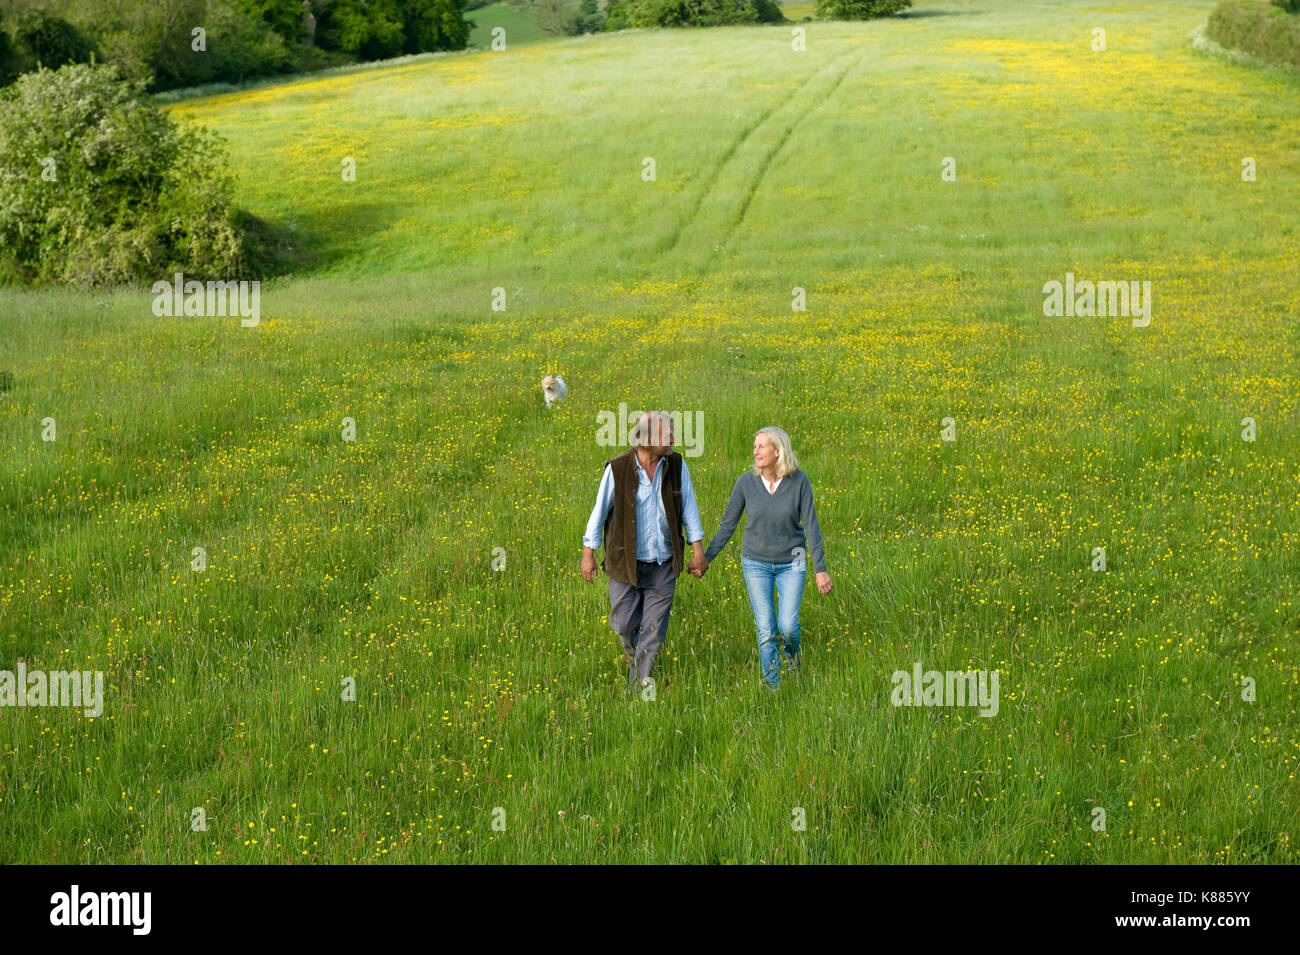 High angle view of man and woman walking hand in hand across a meadow. Stock Photo